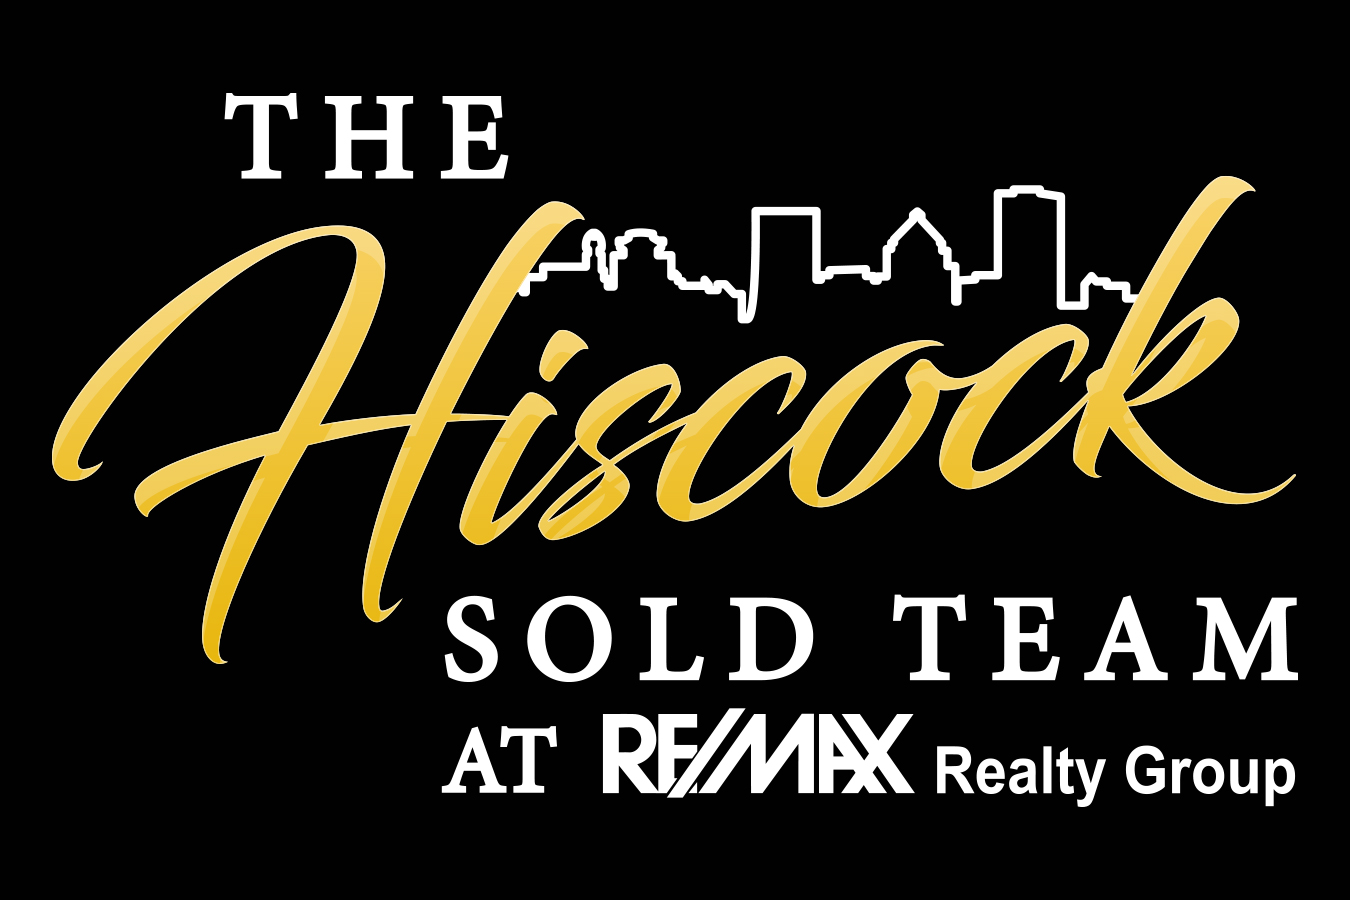 The Hiscock Sold Team at RE/MAX Realty Group